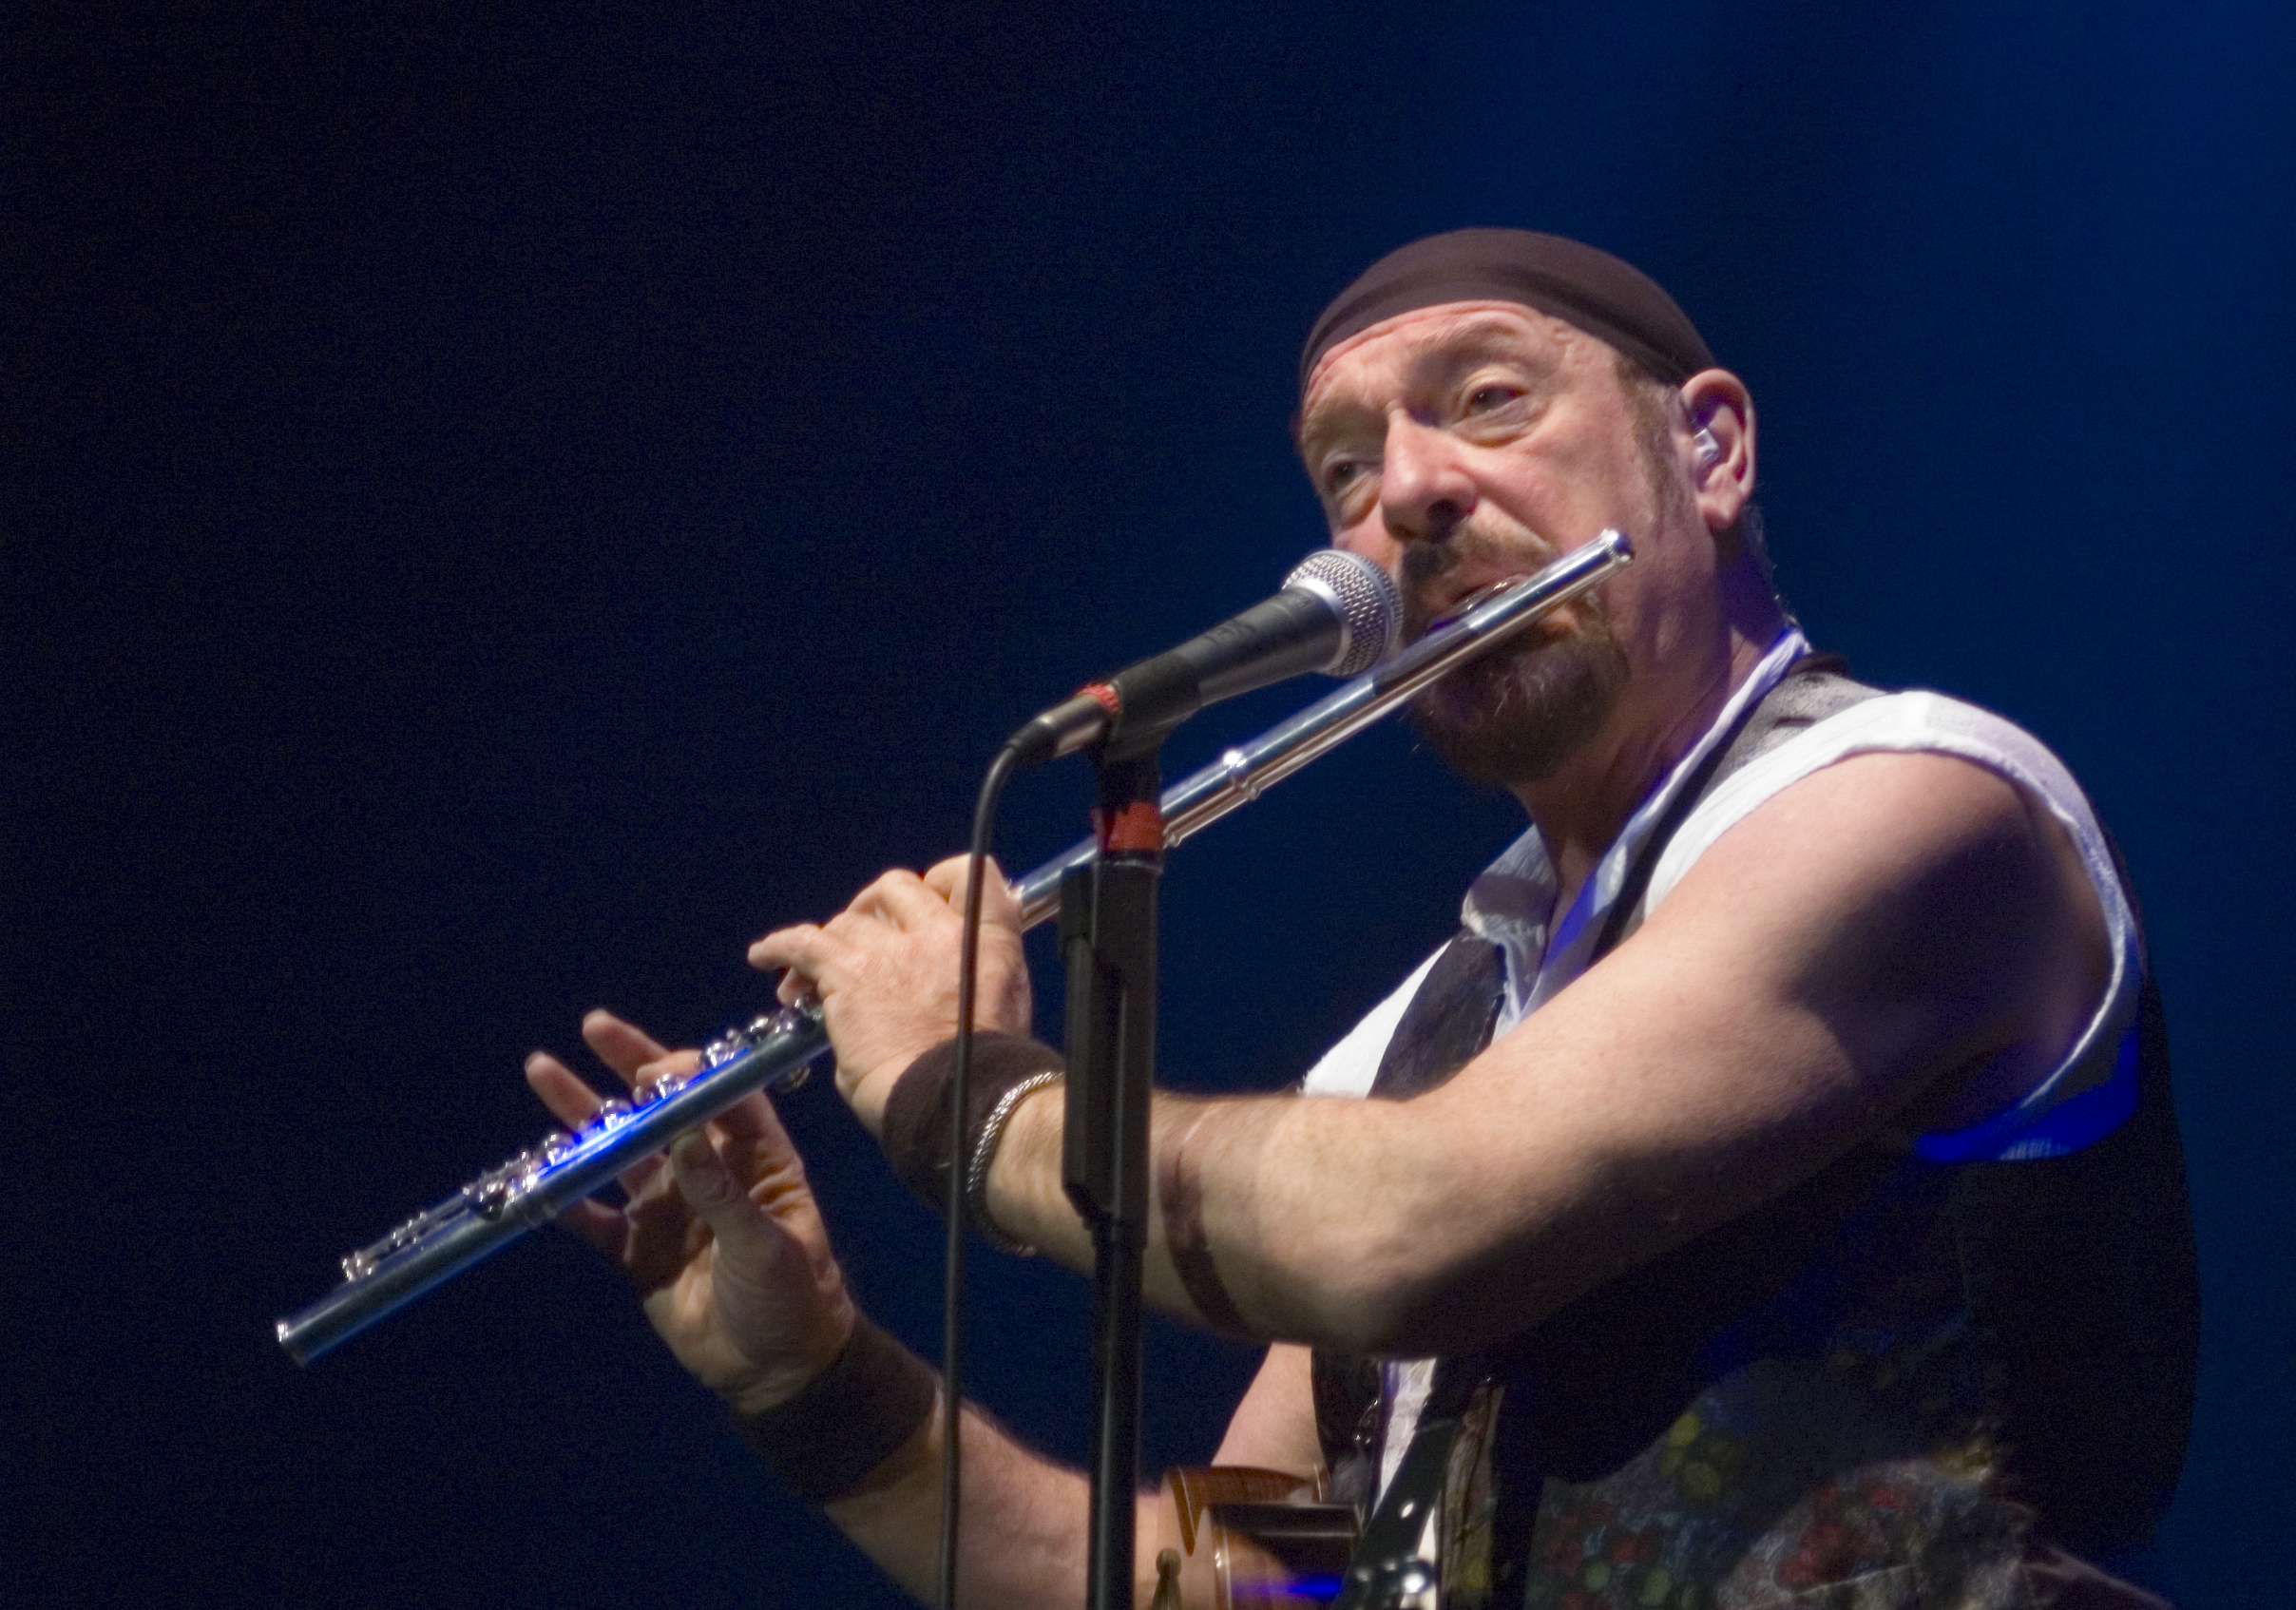 Jethro Tull’s Ian Anderson On Thick As A Brick 2, The Grammys And More